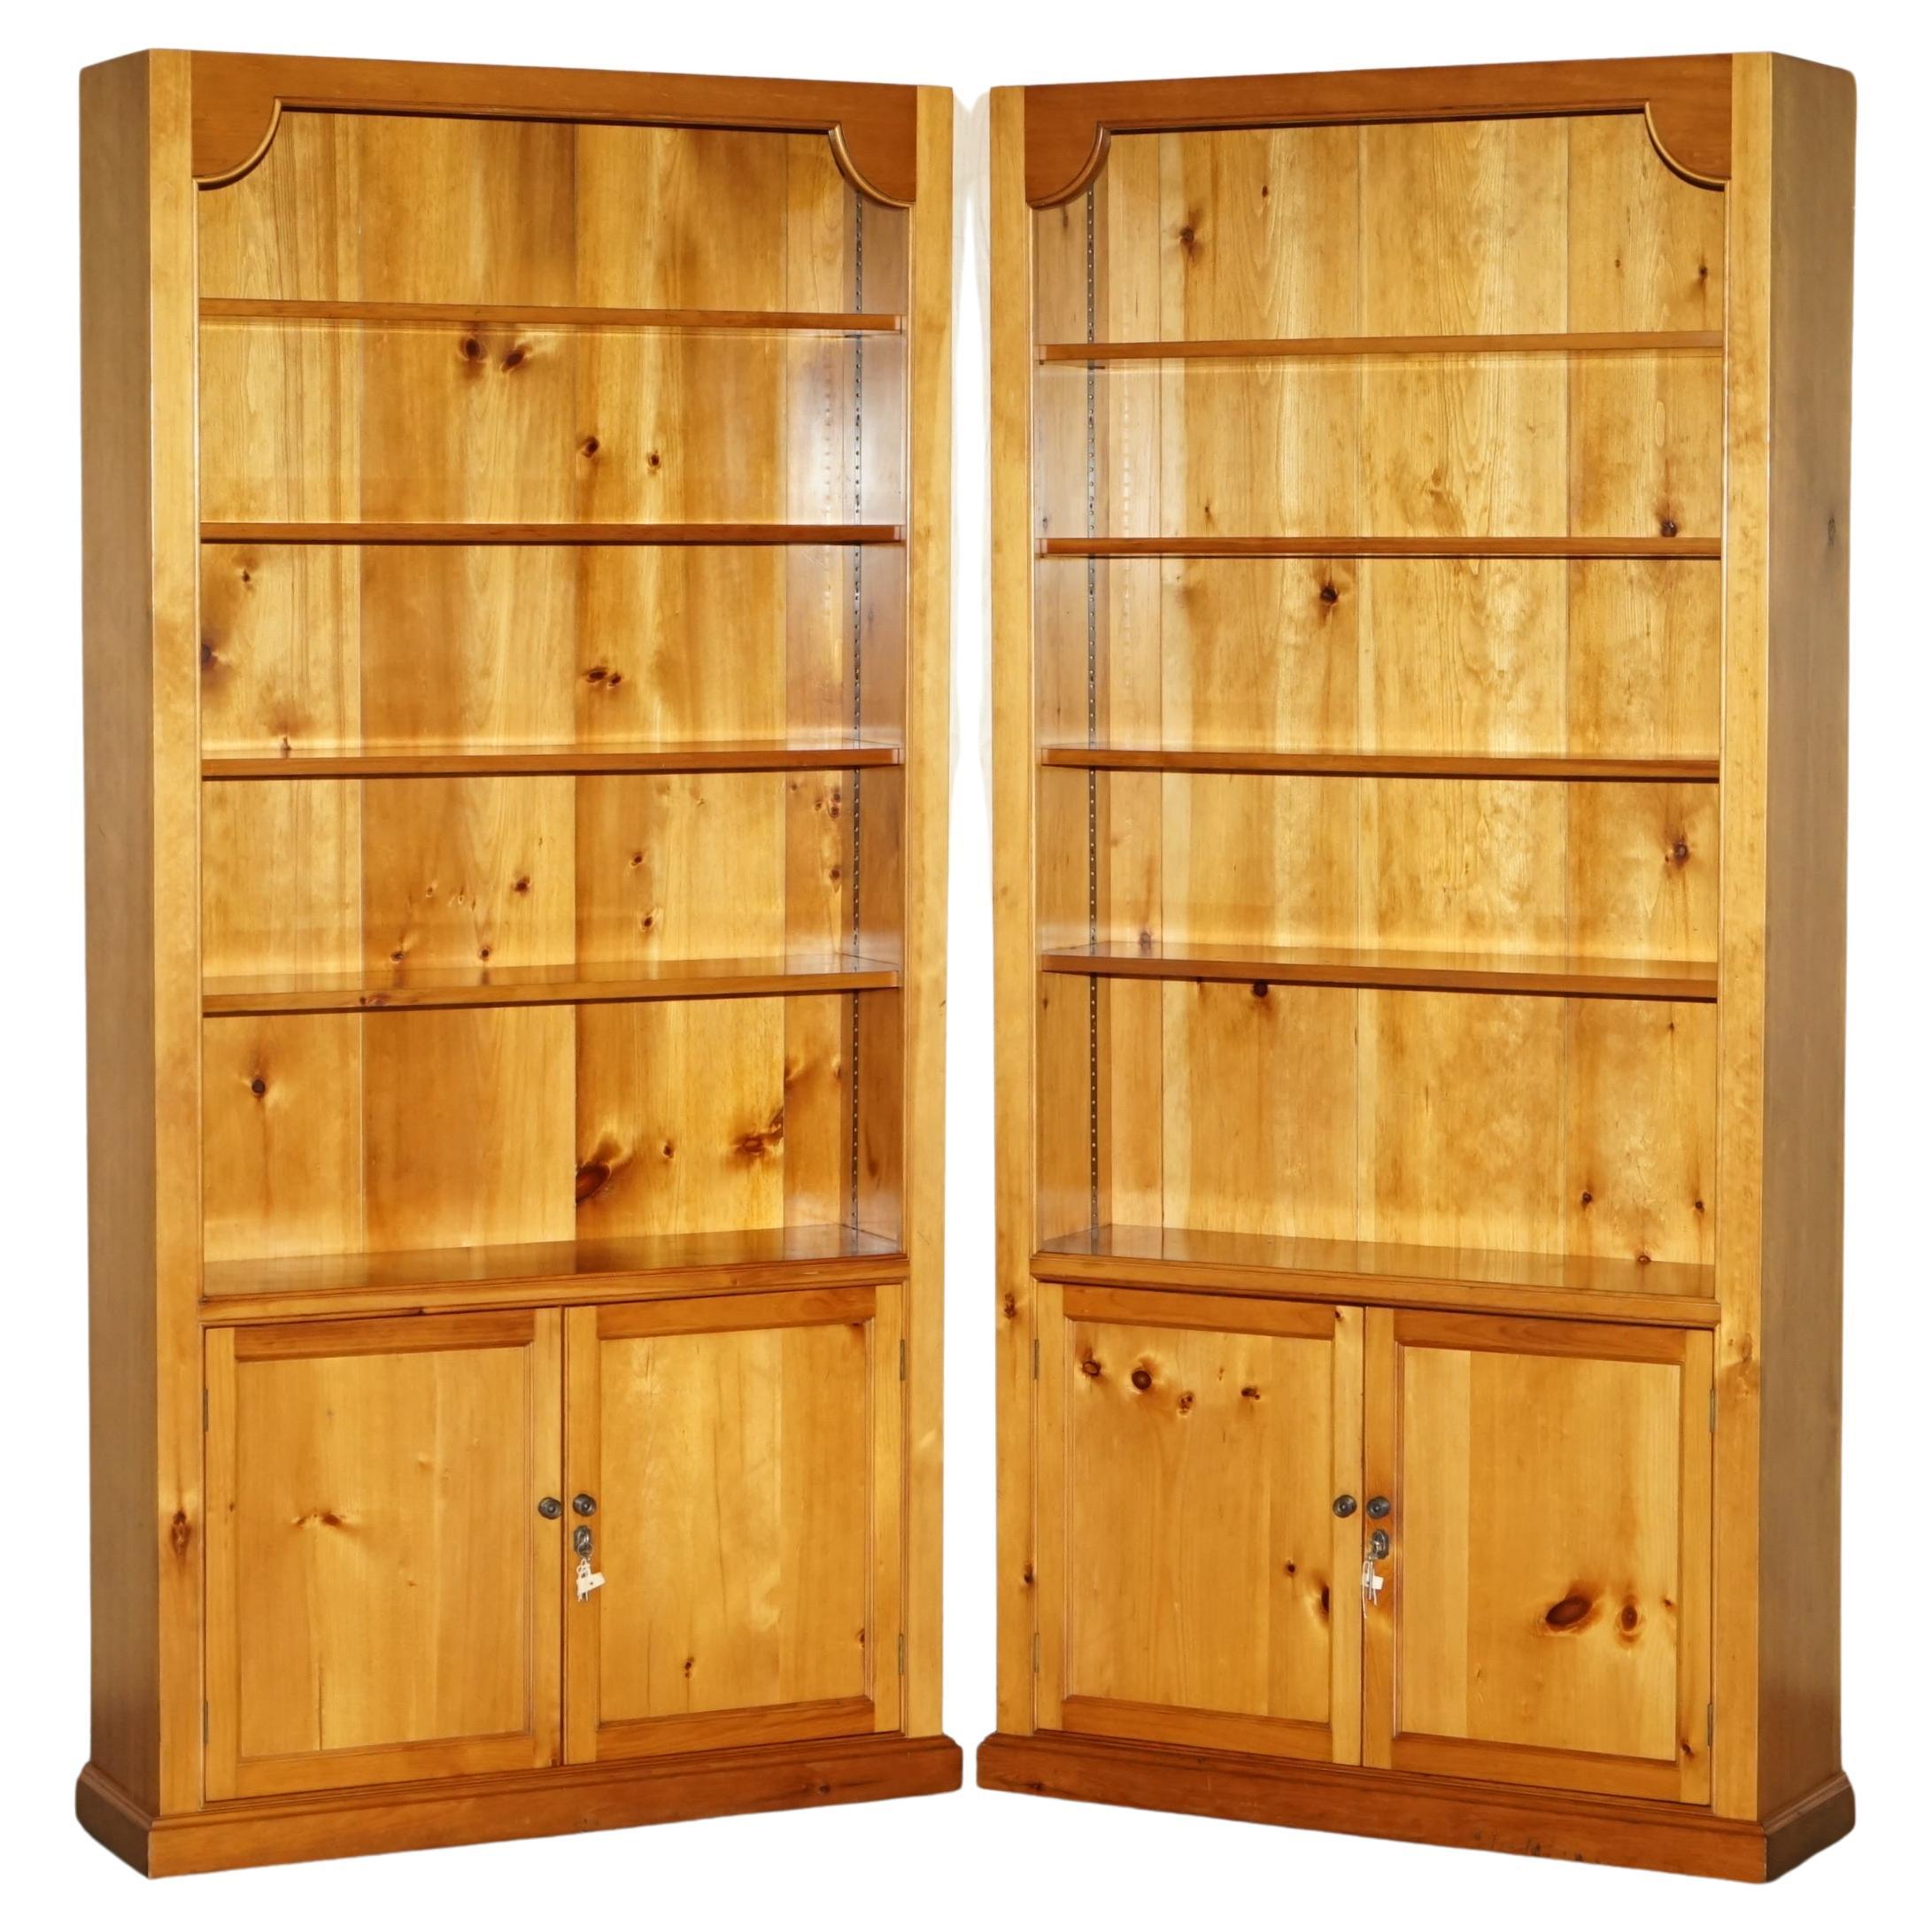 PAIR OF ViNTAGE CHERRYWOOD OPEN LIBRARY BOOKCASES WITH LOCKABLE CUPBOARD BASES For Sale